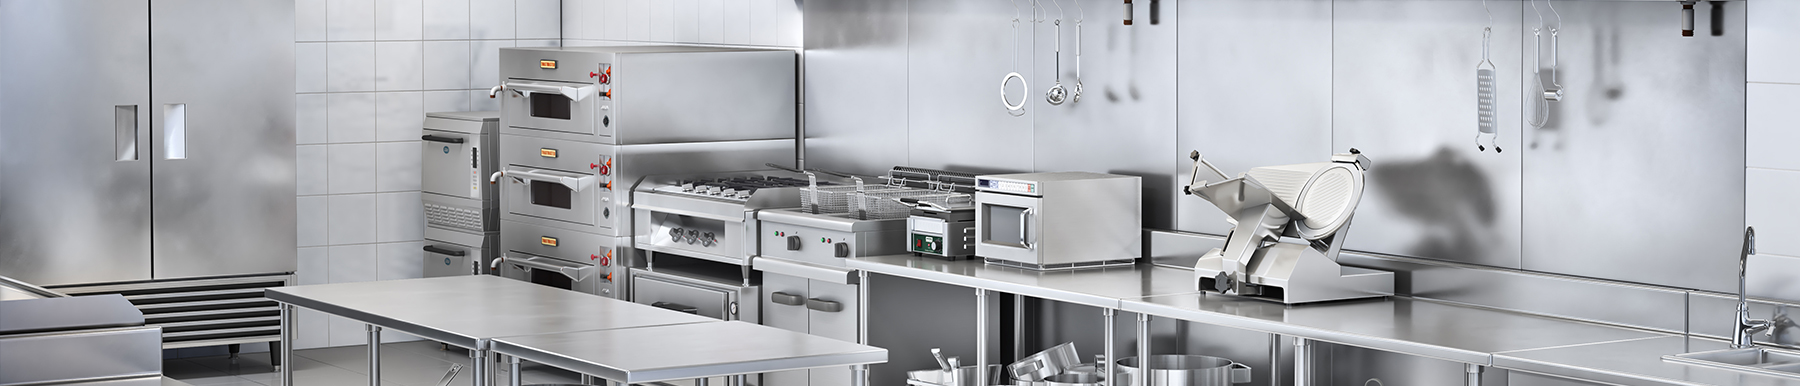 Catering Equipment Suppliers Near Macclesfield | H2 Catering Equipment Catering Equipment